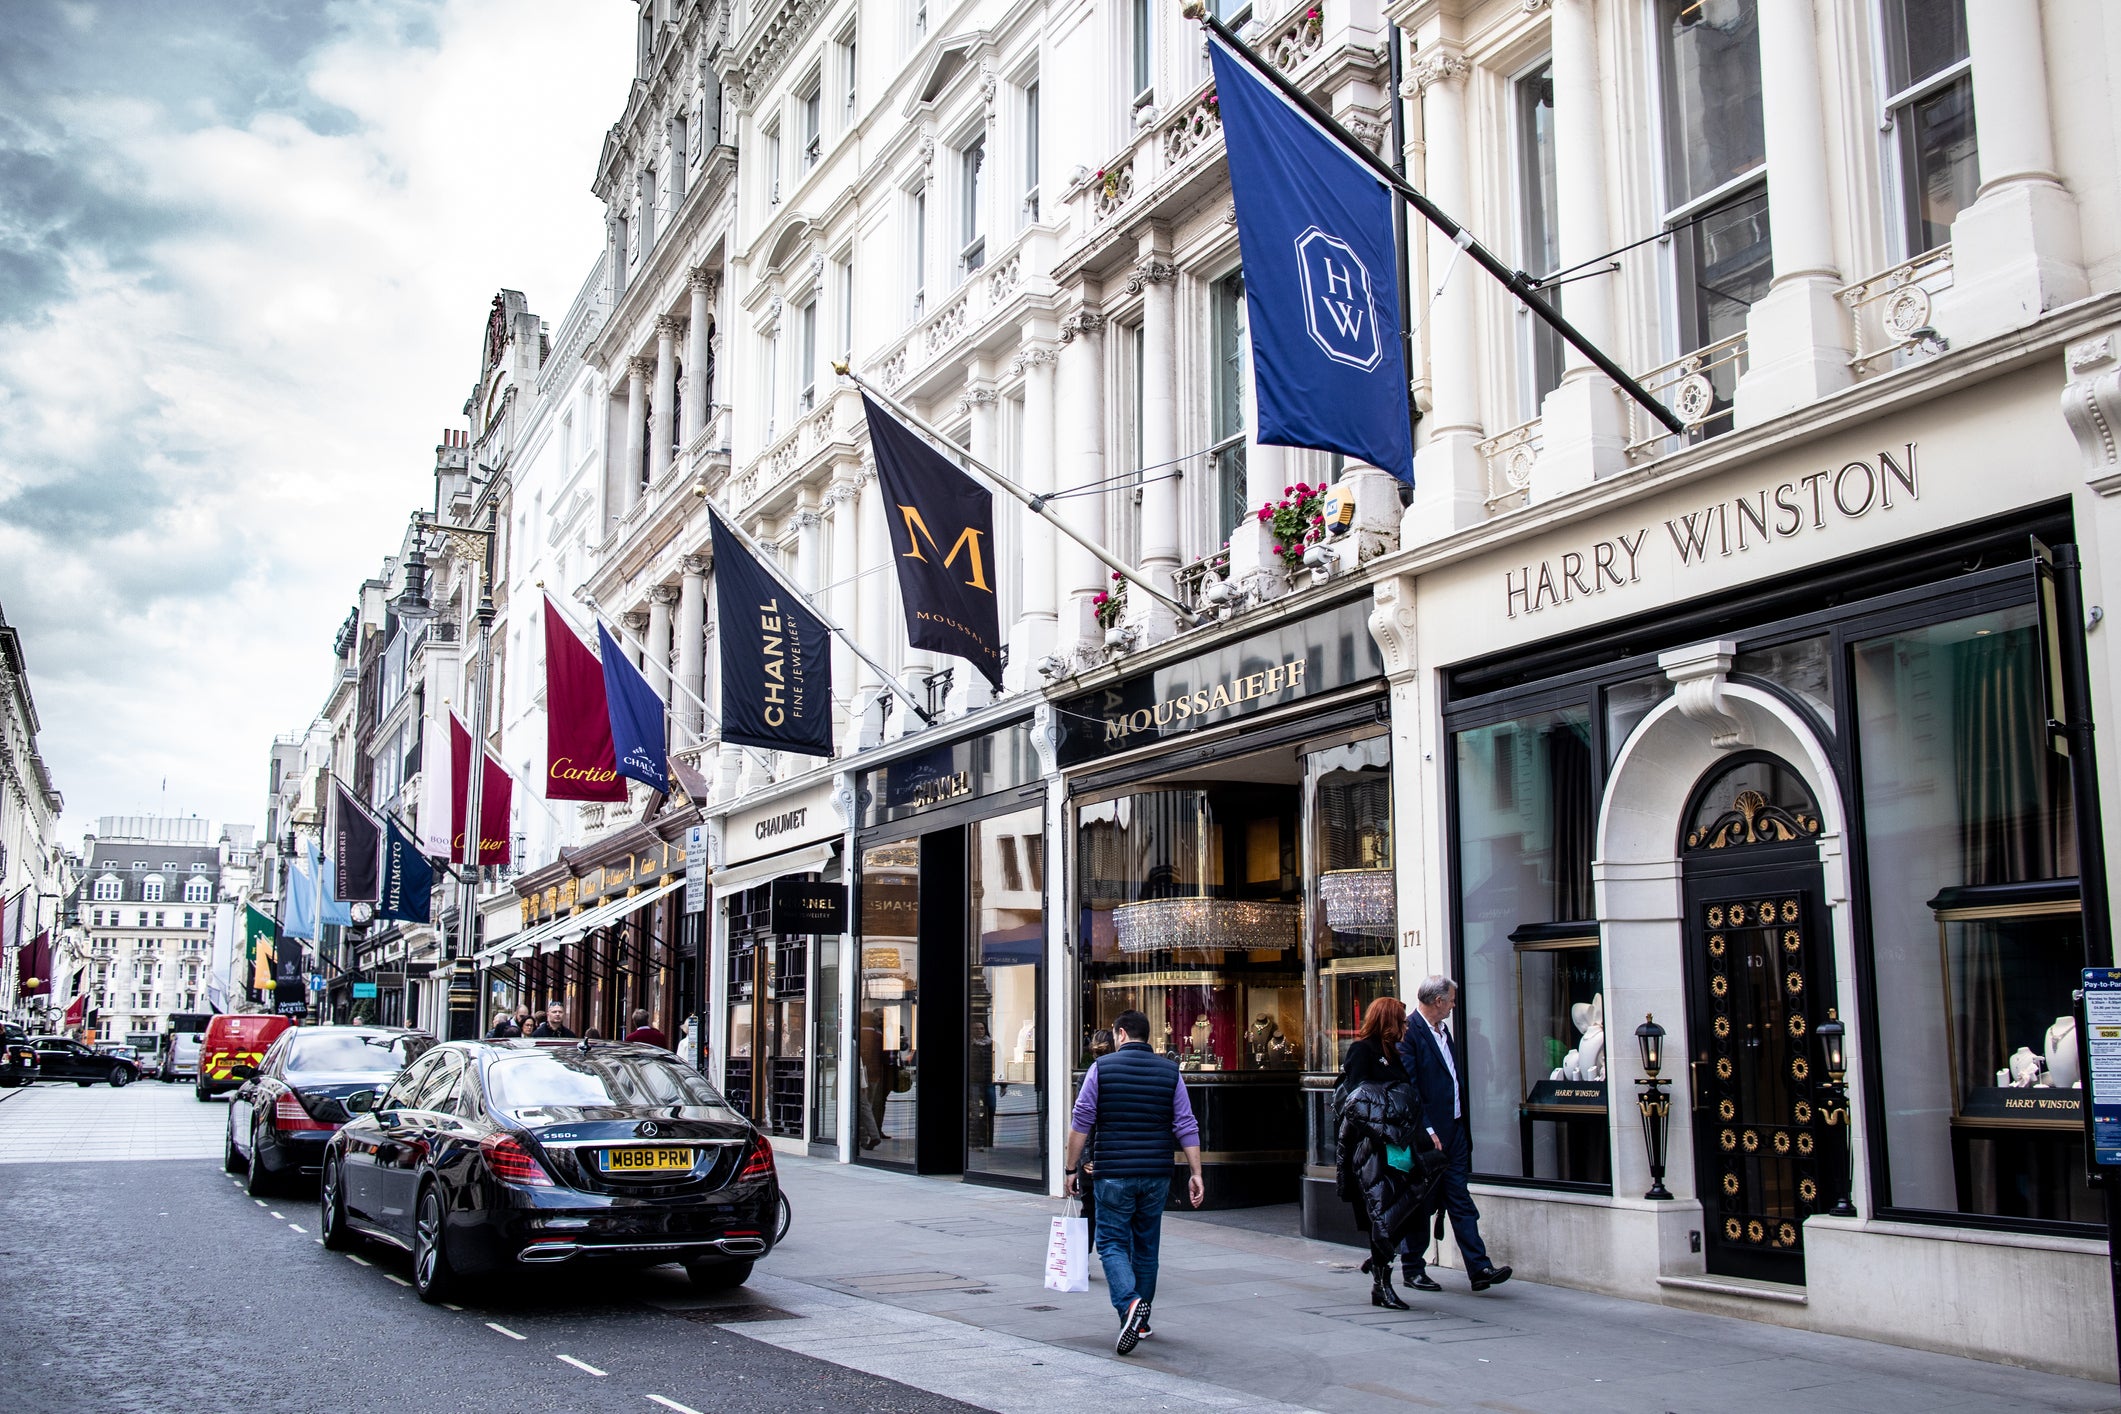 High end jewellers and original fashion labels exude luxury on Bond Street